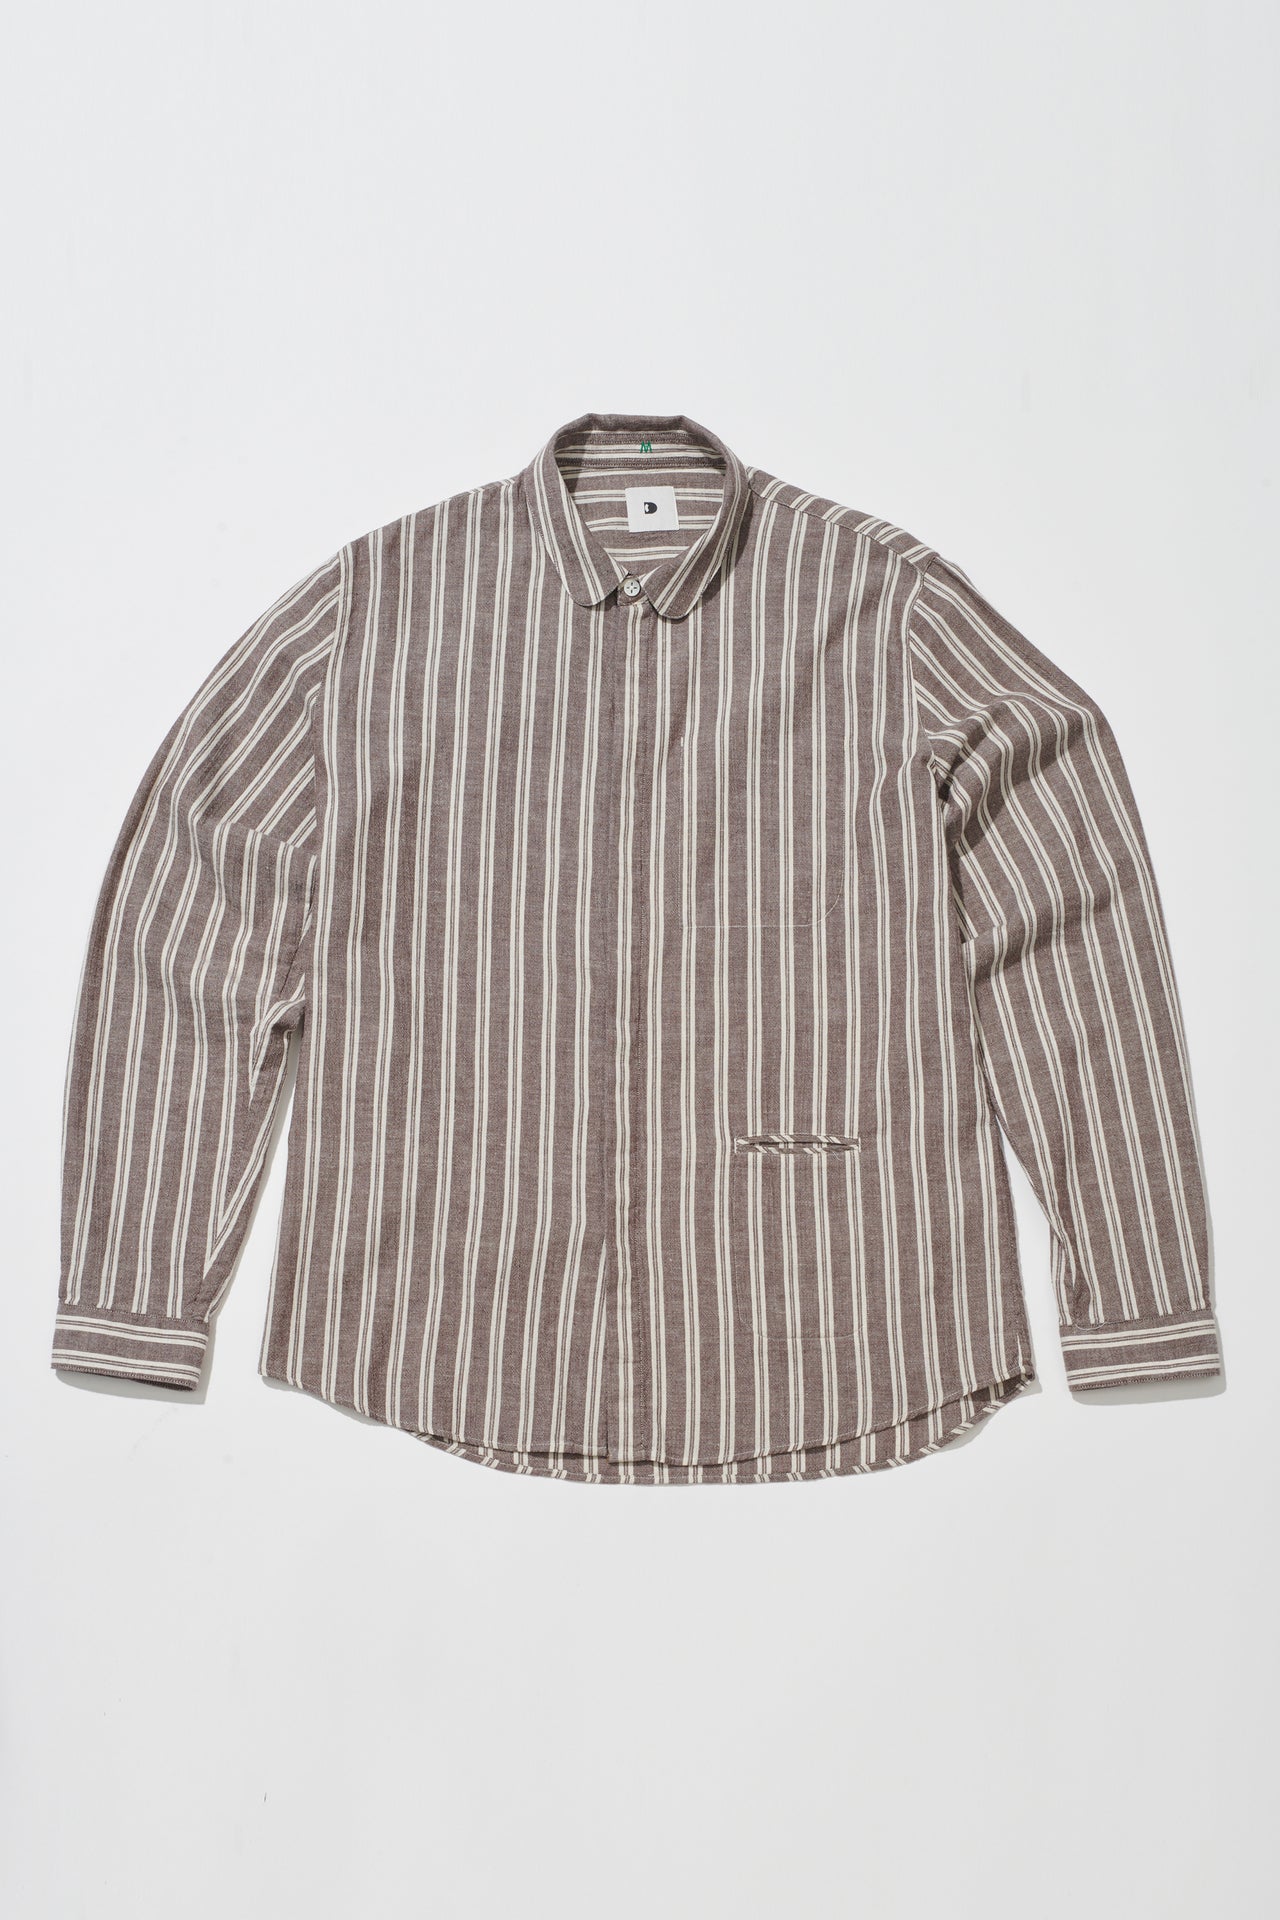 Cute Round Collar Shirt in a  Taupe Brown and White Striped Japanese Cotton and Linen